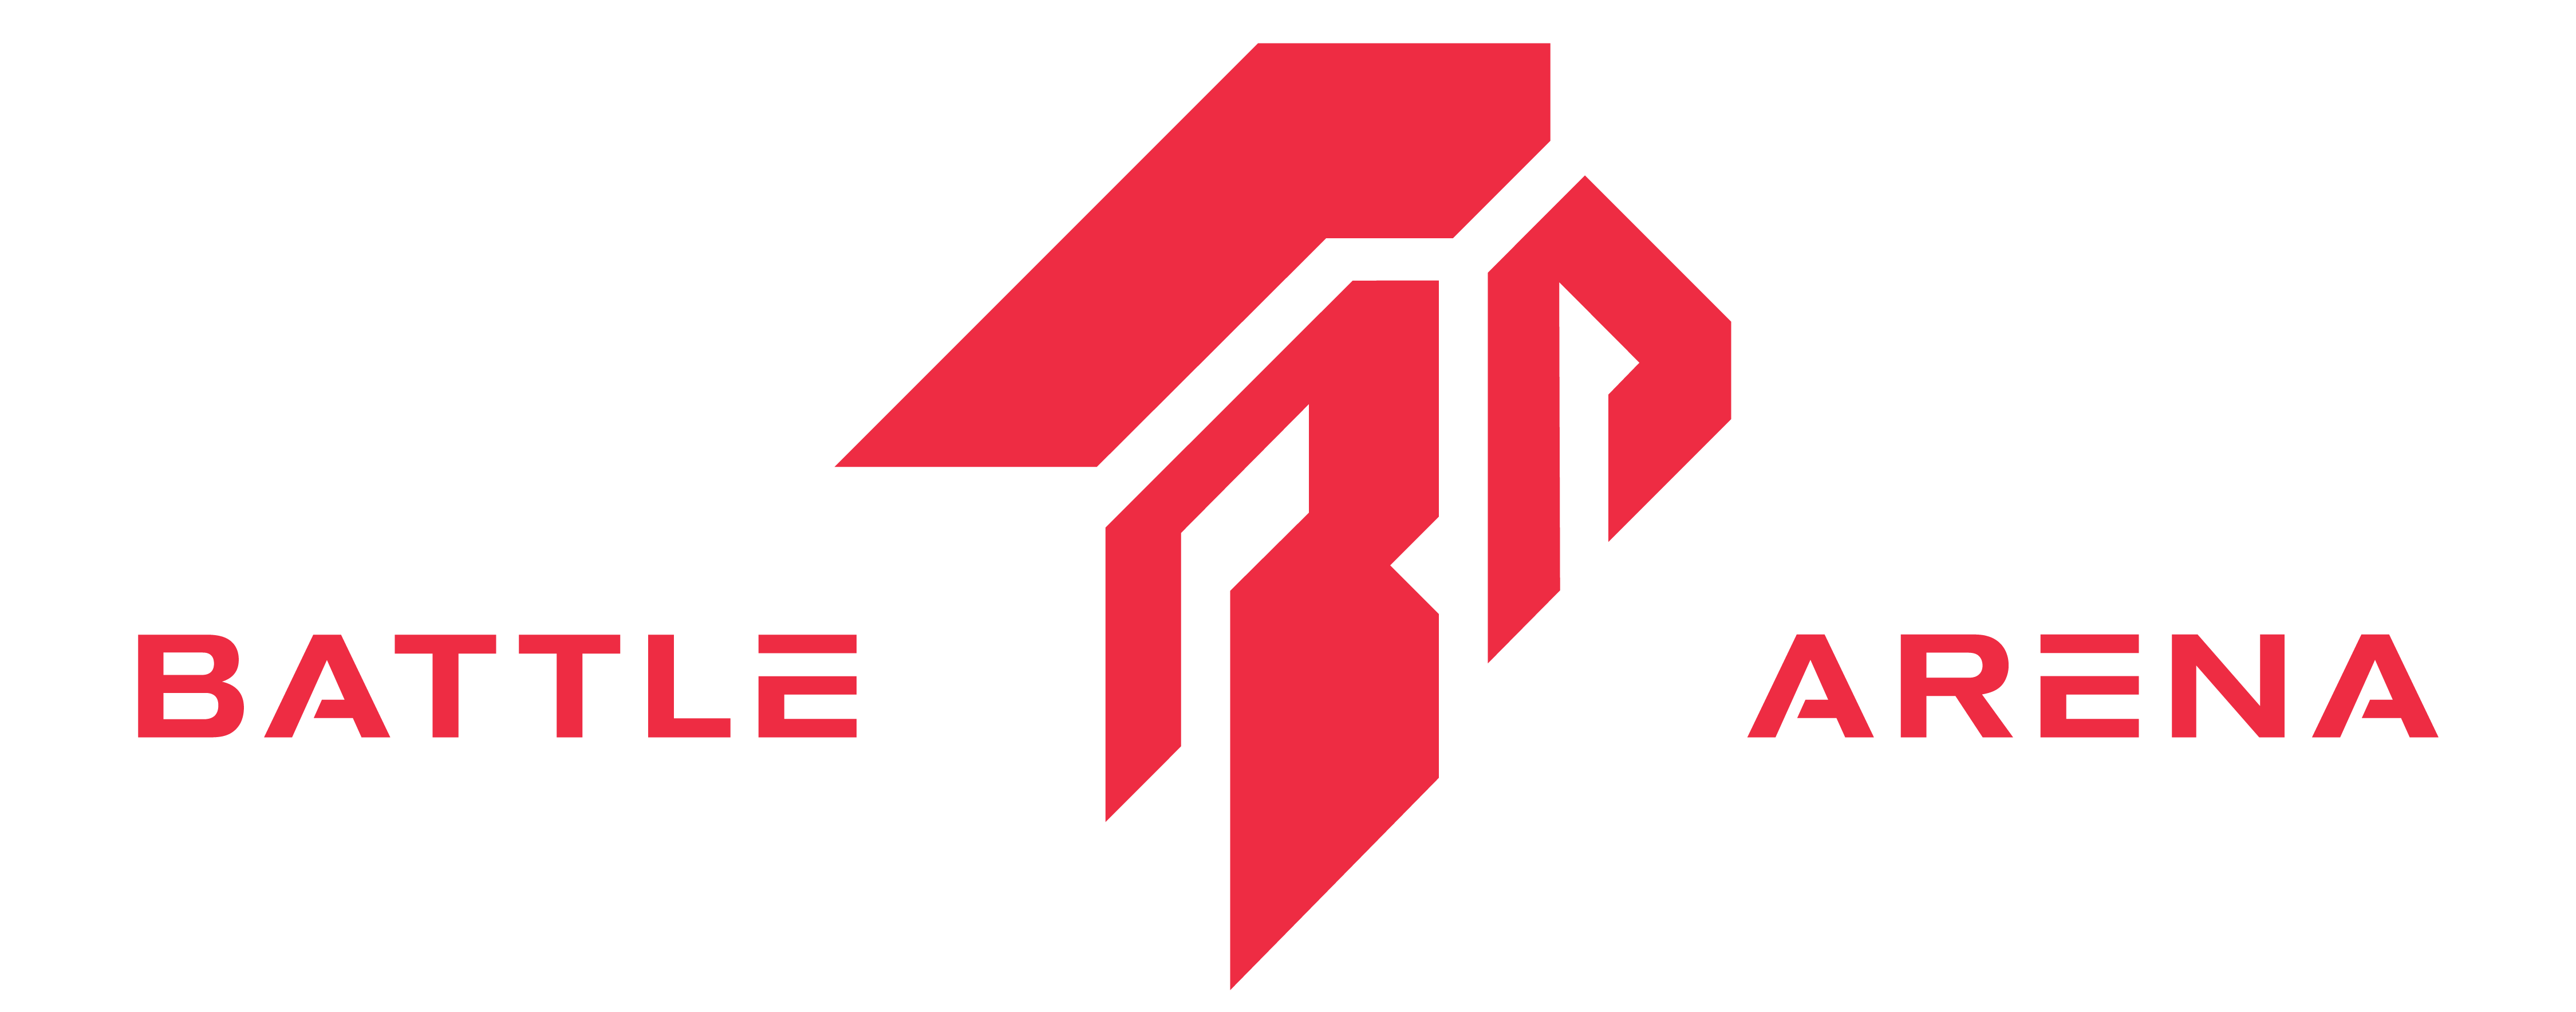 Arena Logo - Battle Arena – Battle Arena is South East Asia's biggest Esports club